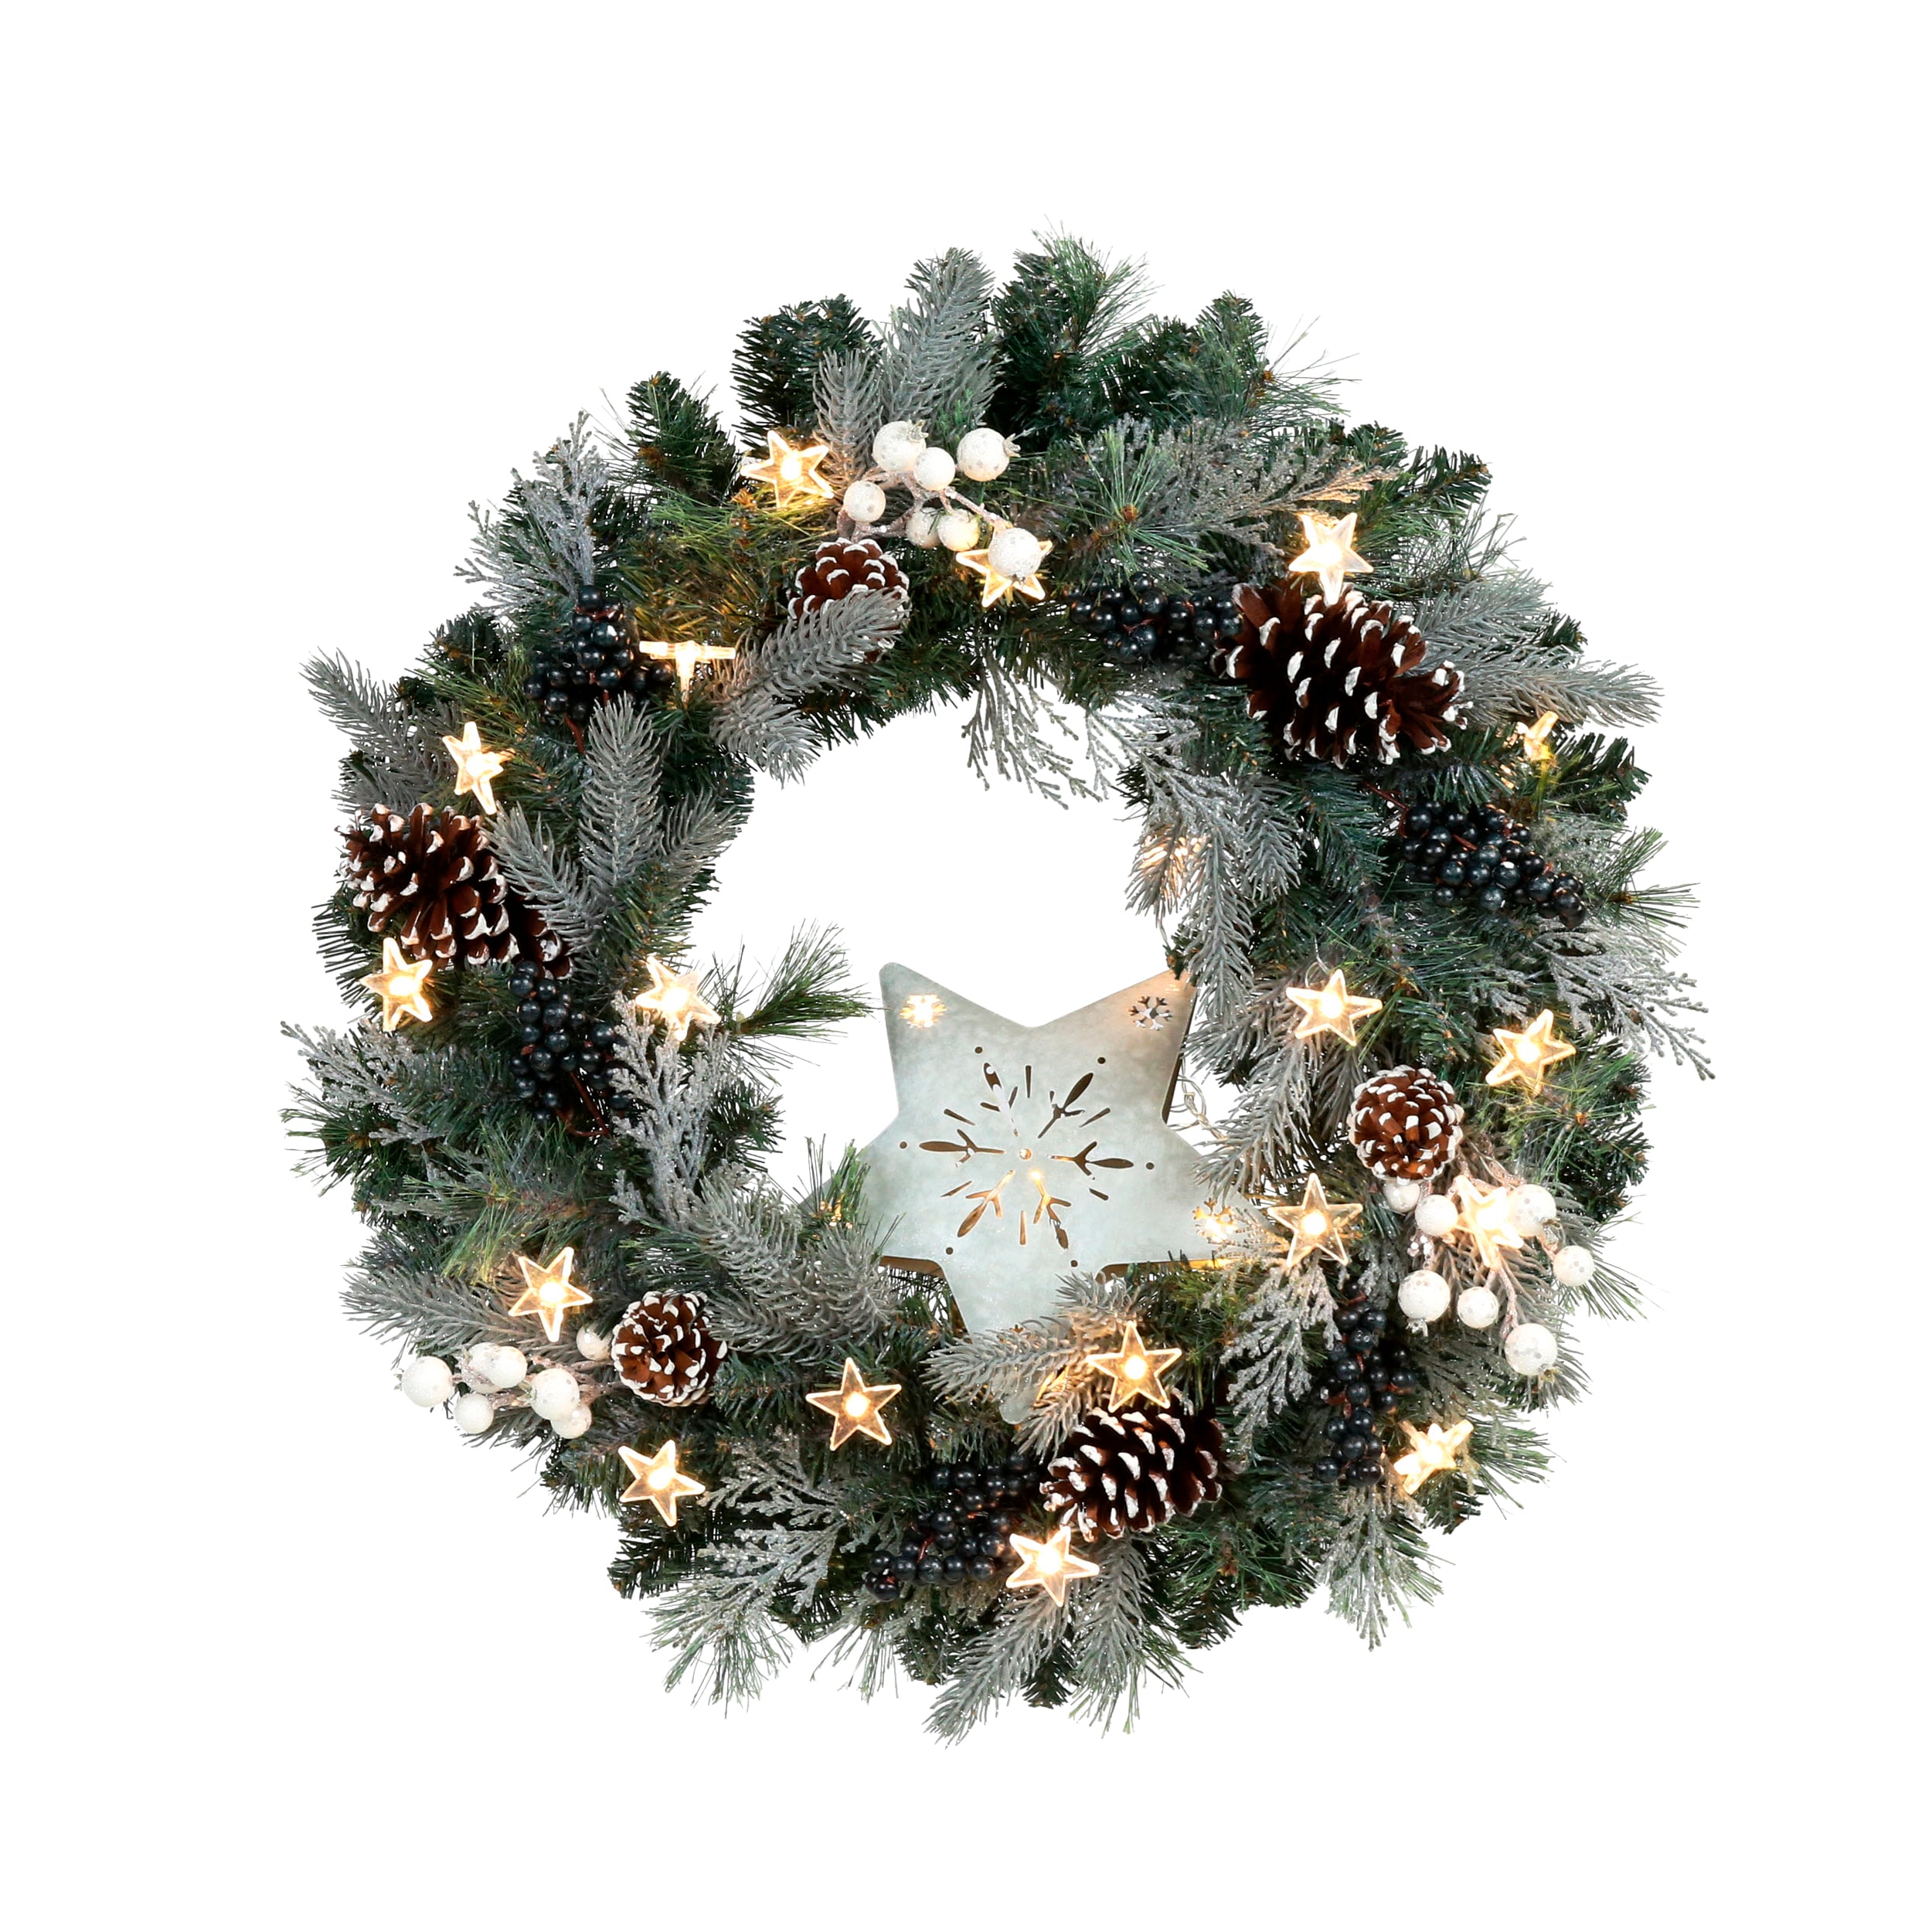 Decorated with Muti-Finish Ball Ornaments Valery Madelyn 51cm Large Pre-Lit Frozen Winter Silver Blue Green Christmas Wreath with Remote Timer 8 Modes 20 LED Lights Battery Operated 